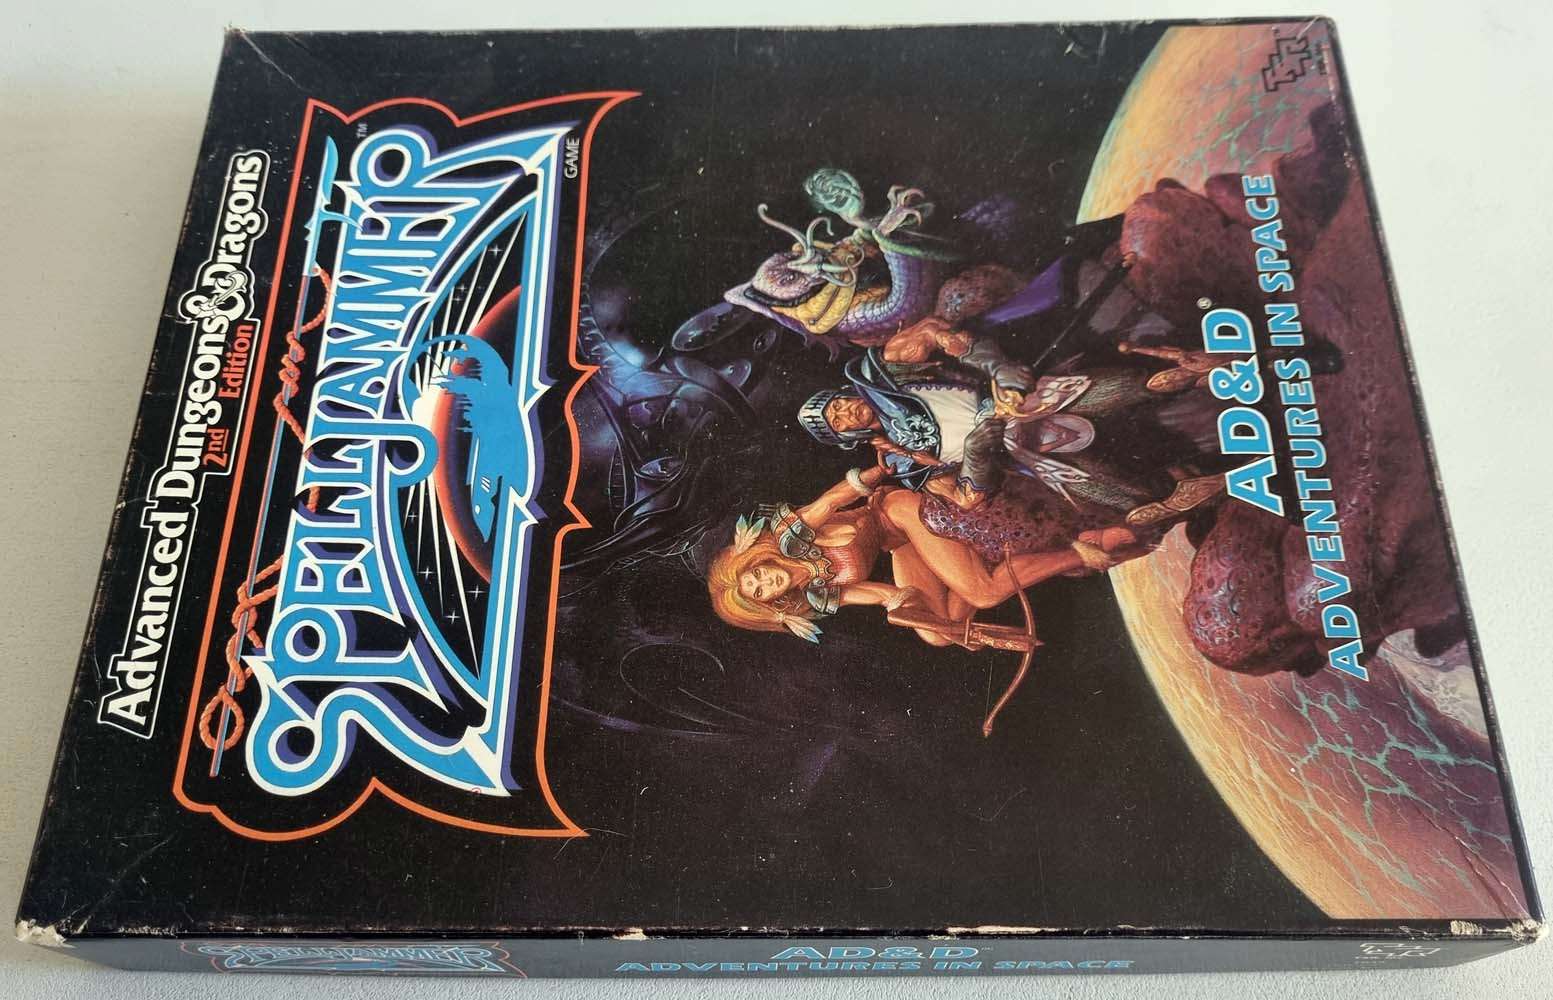 Spelljammer: Advanced Dungeons and Dragons Adventures in Space